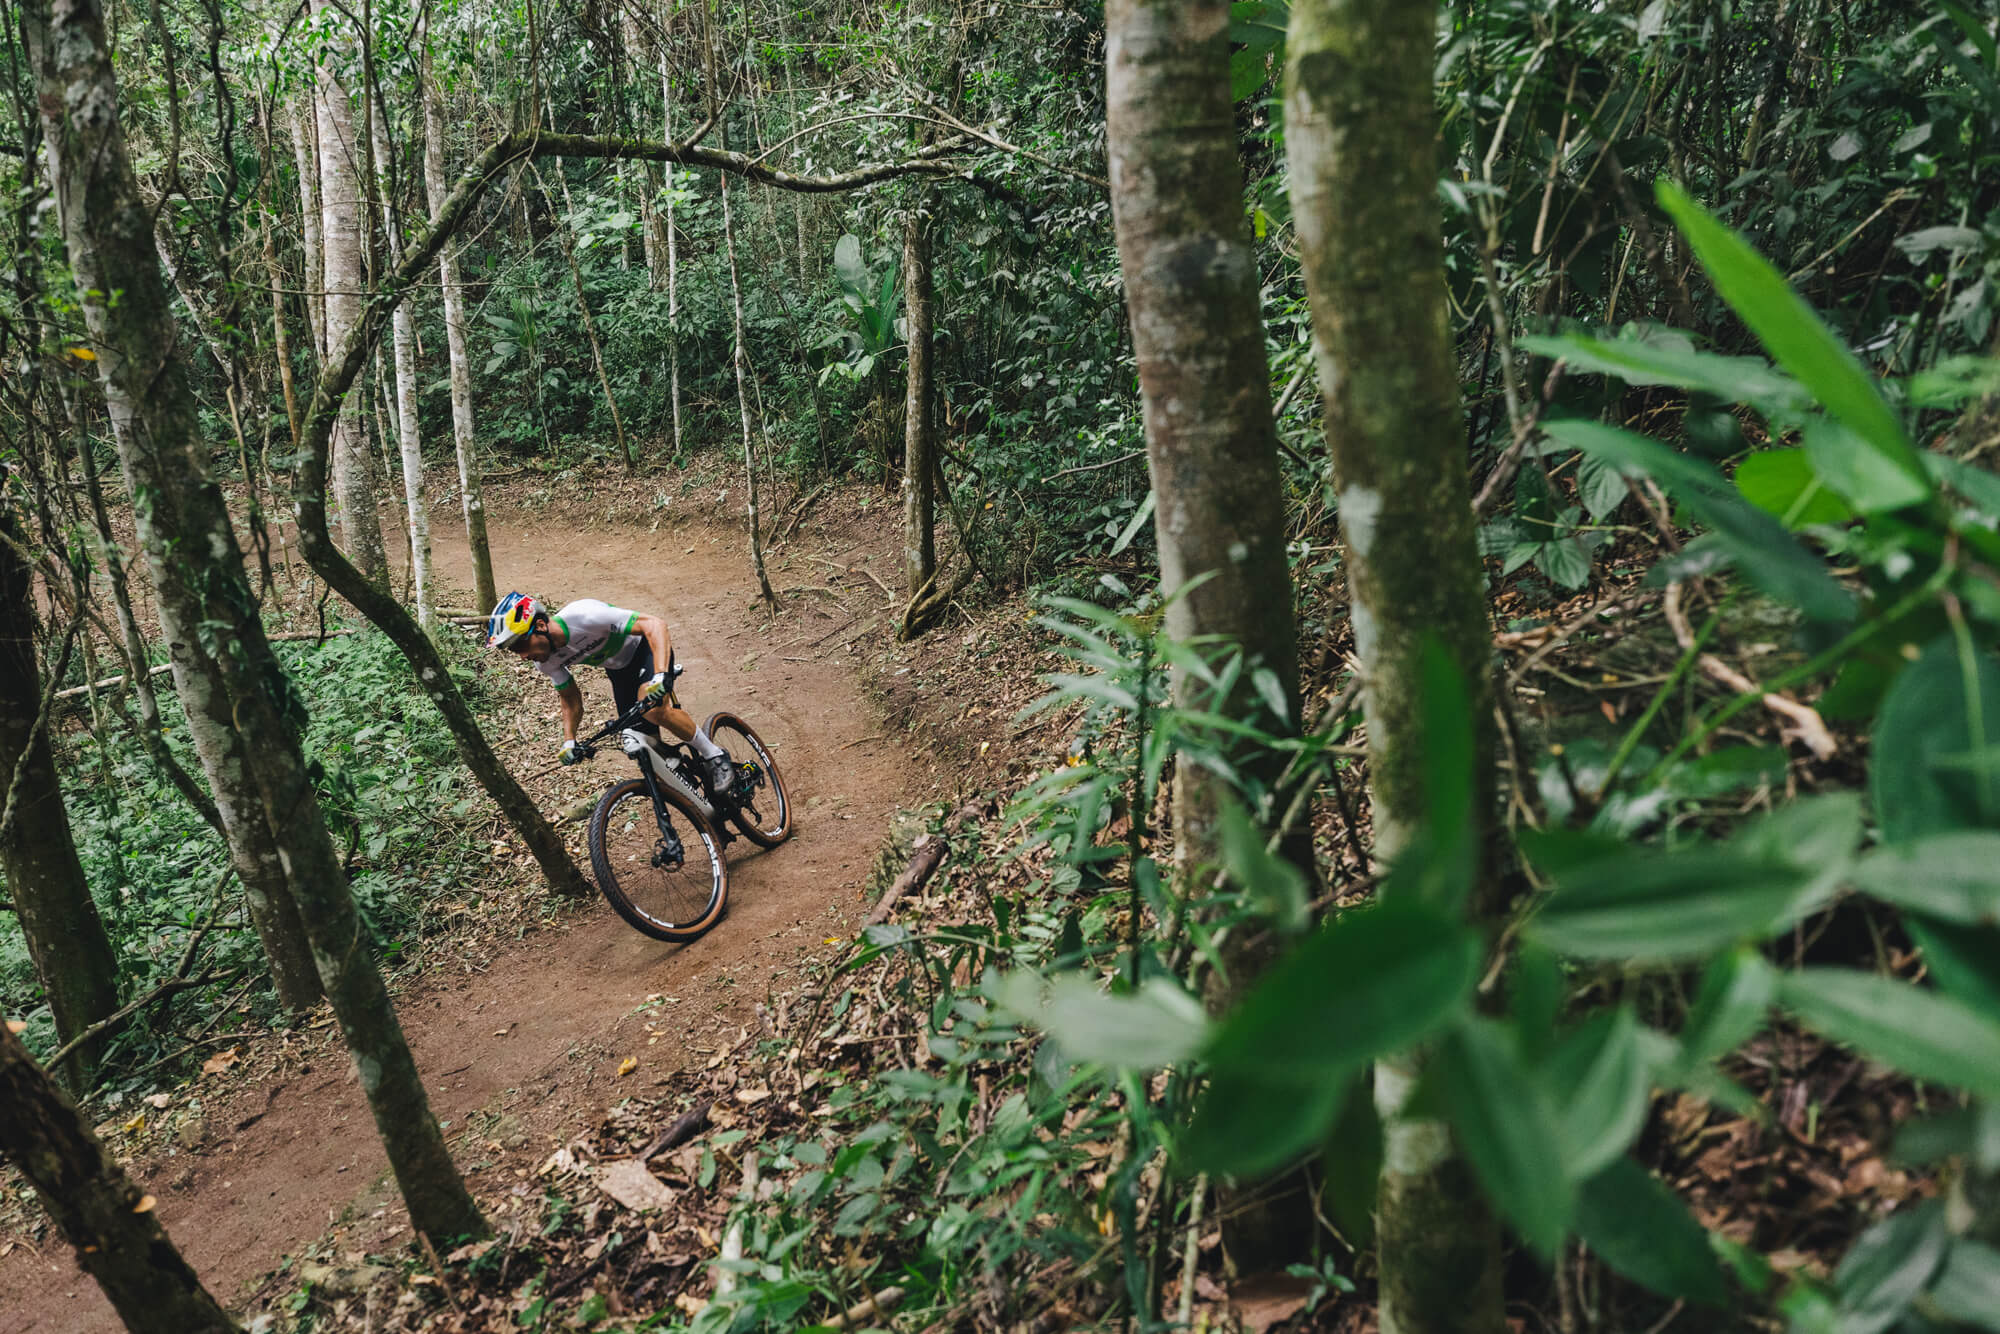 Shimano Pro rider Henrique Avancini This is Home